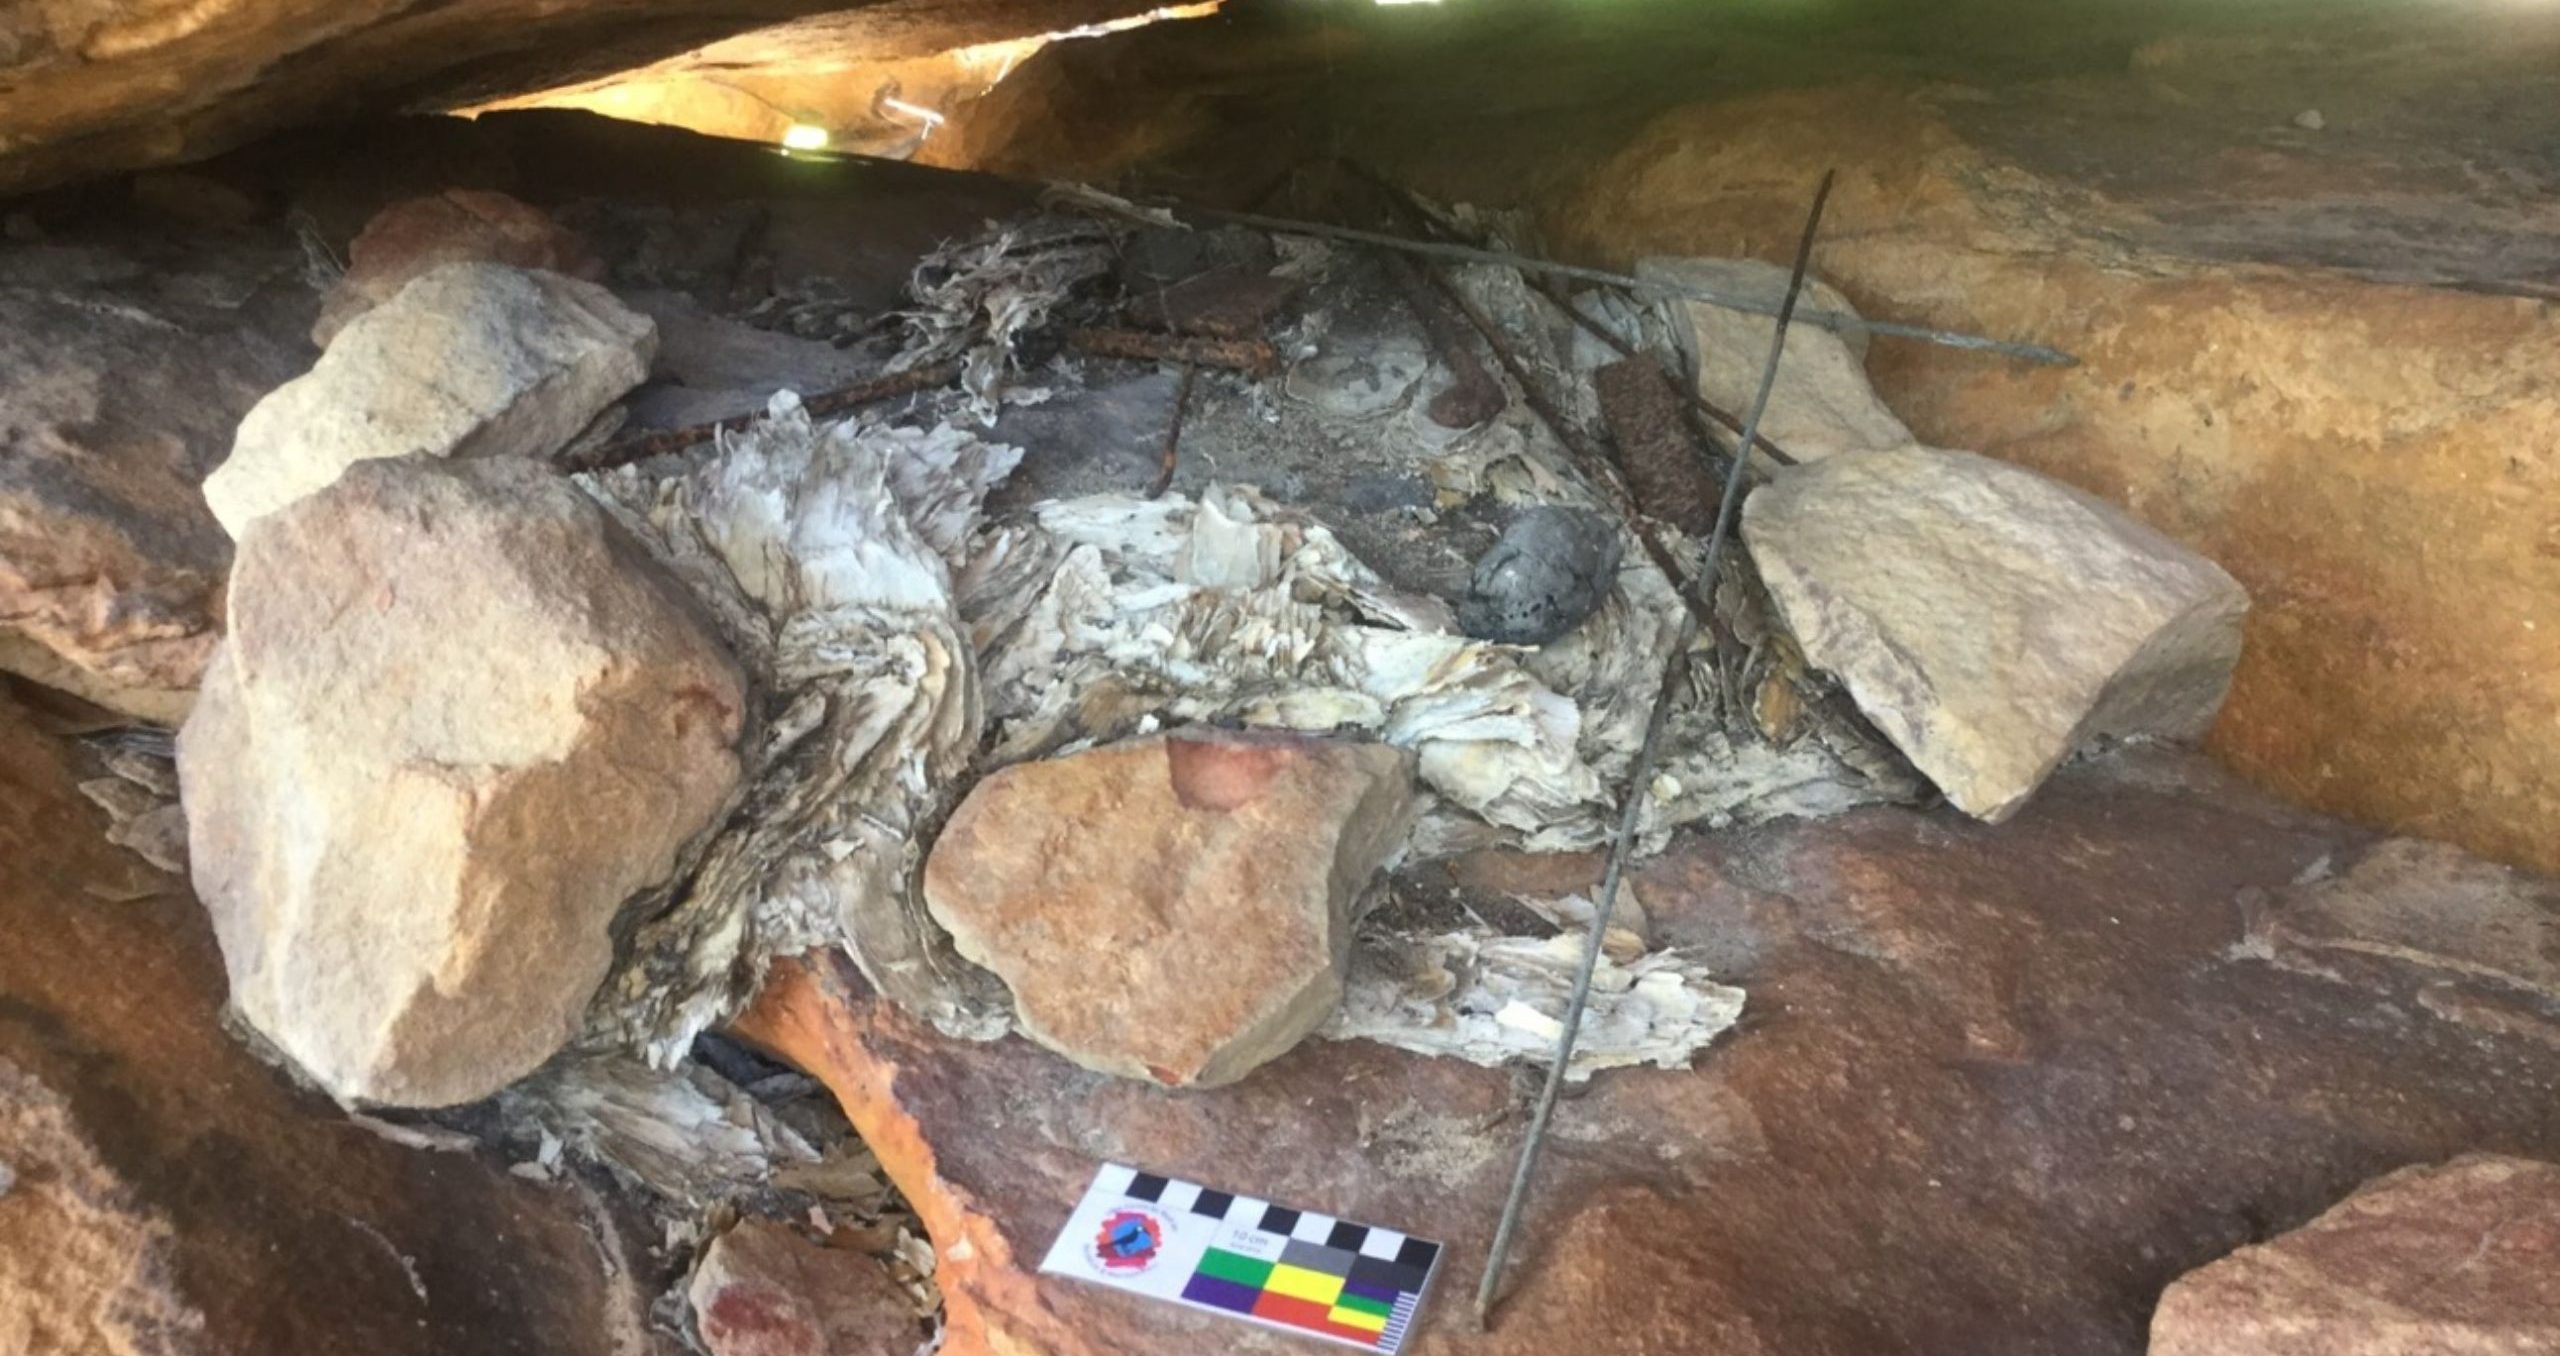 Rock Art Australia’s Kimberley Visions project encounters a cache of metal objects